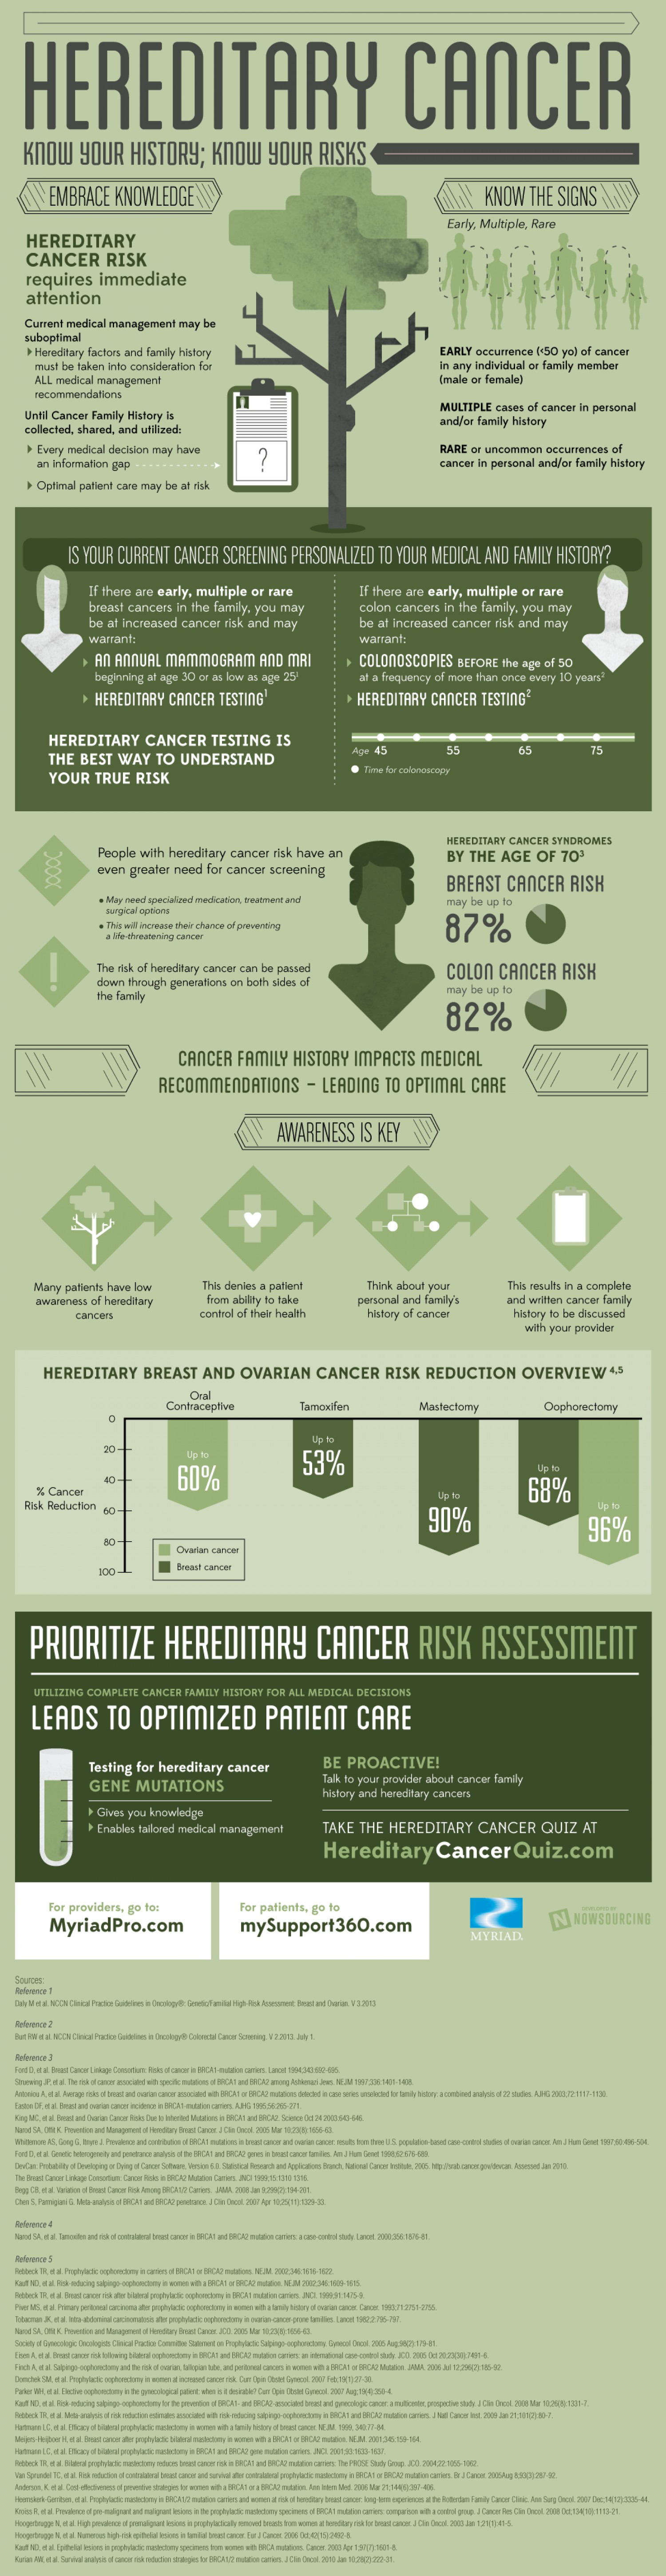 The things that you should know about your family history to determine if you are at risk for cancer infographic